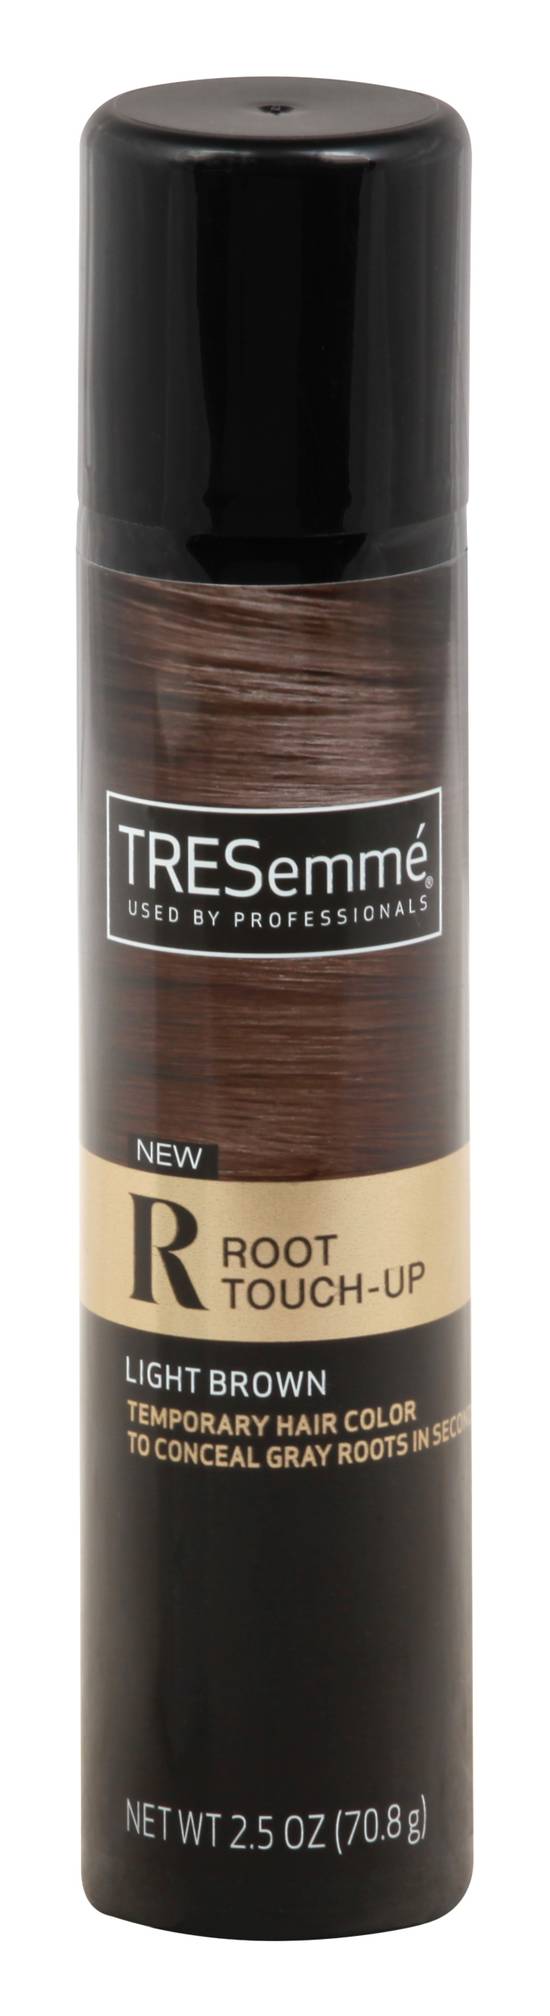 Tresemme Root Touch-Up Light Brown Temporary Hair Color